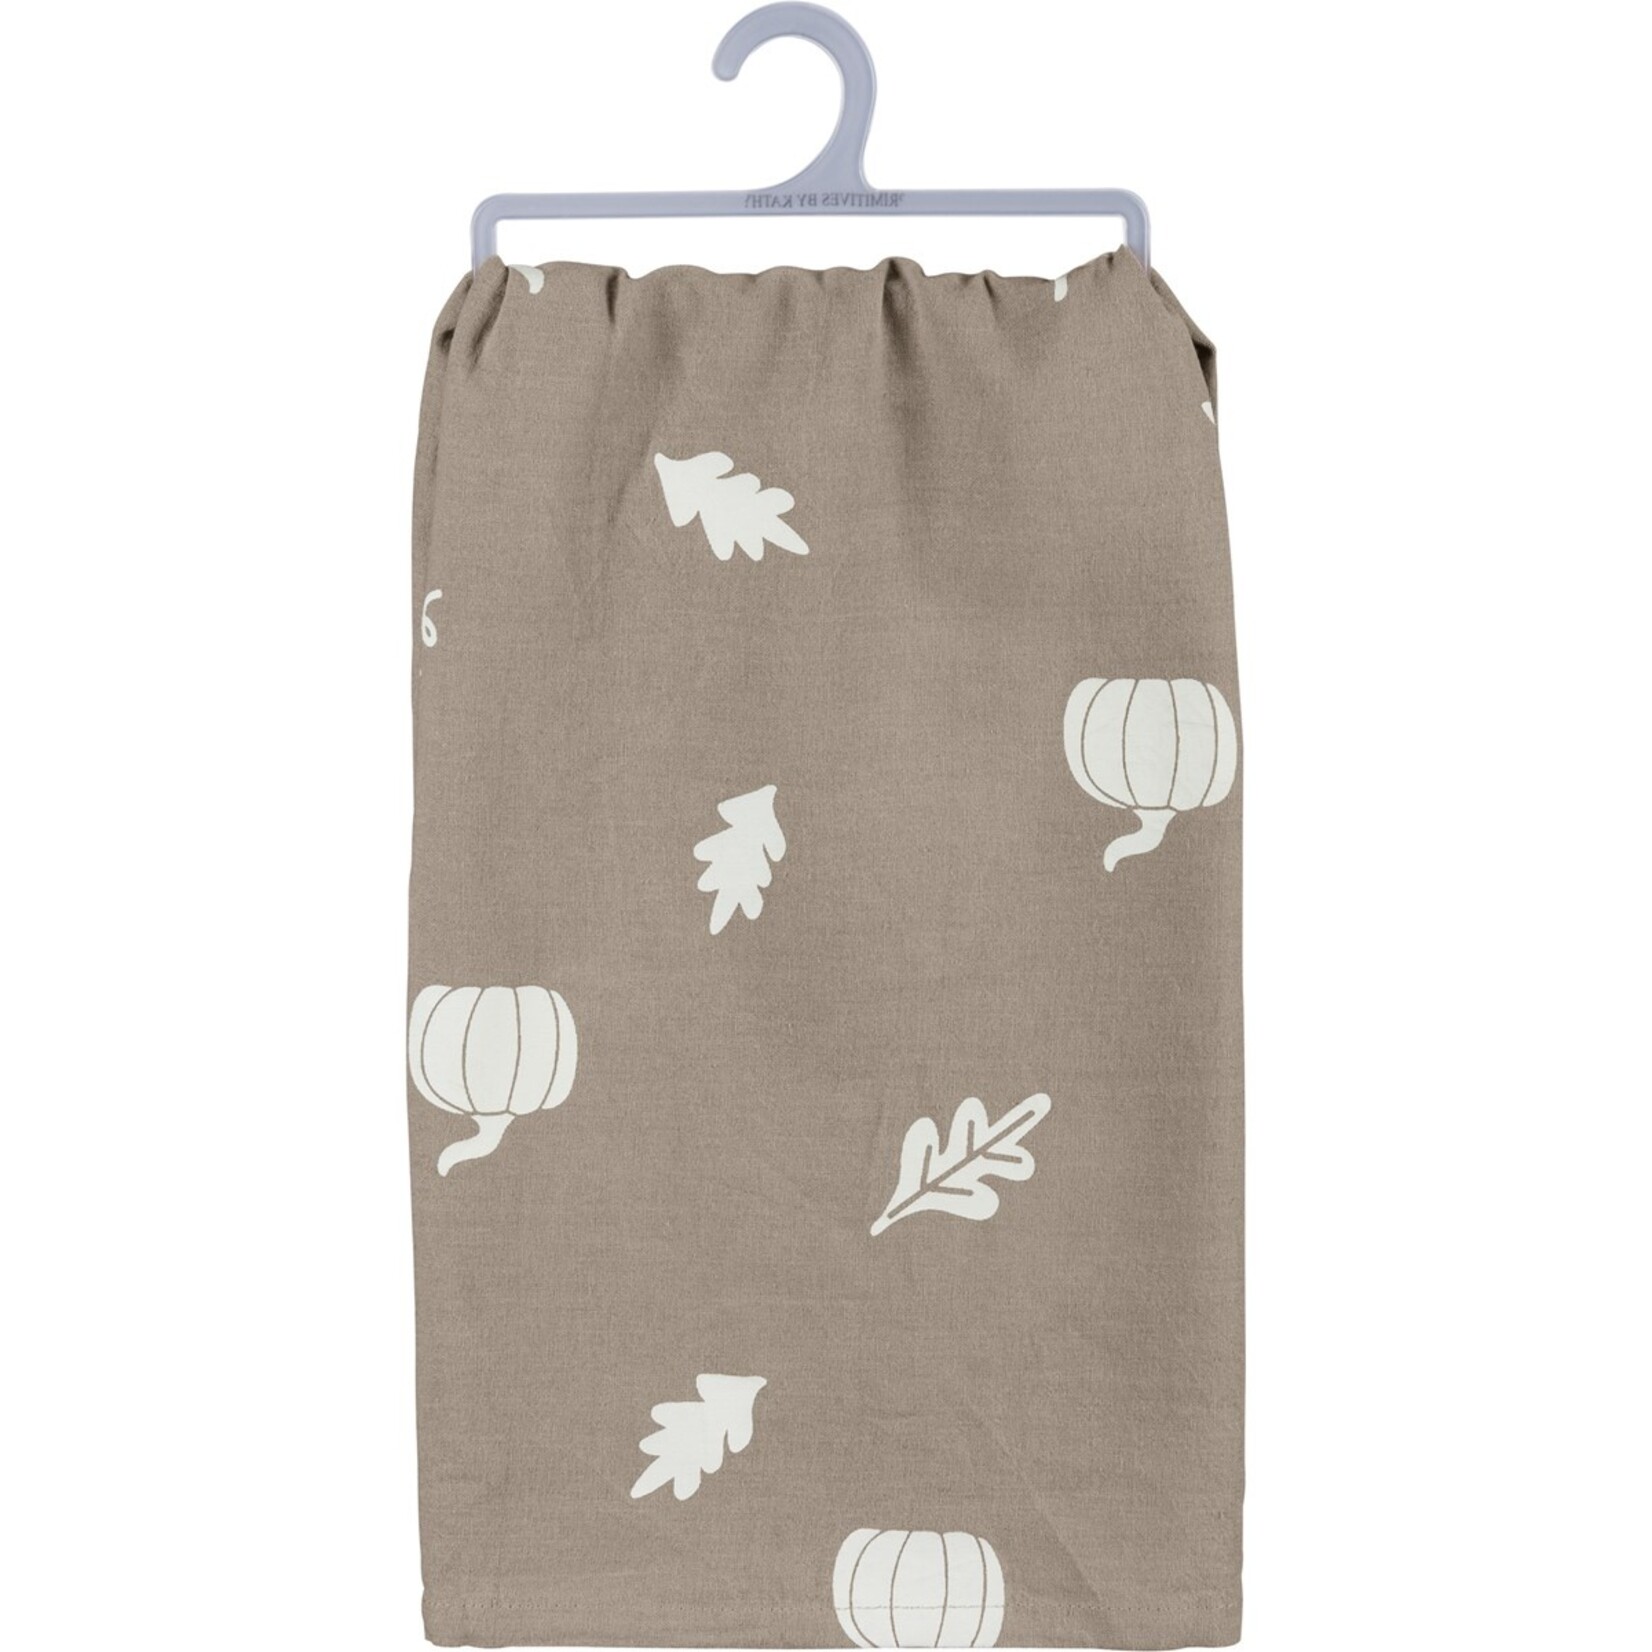 Primitives by Kathy Primitives by Kathy Happy Fall Y'all Dish Towel